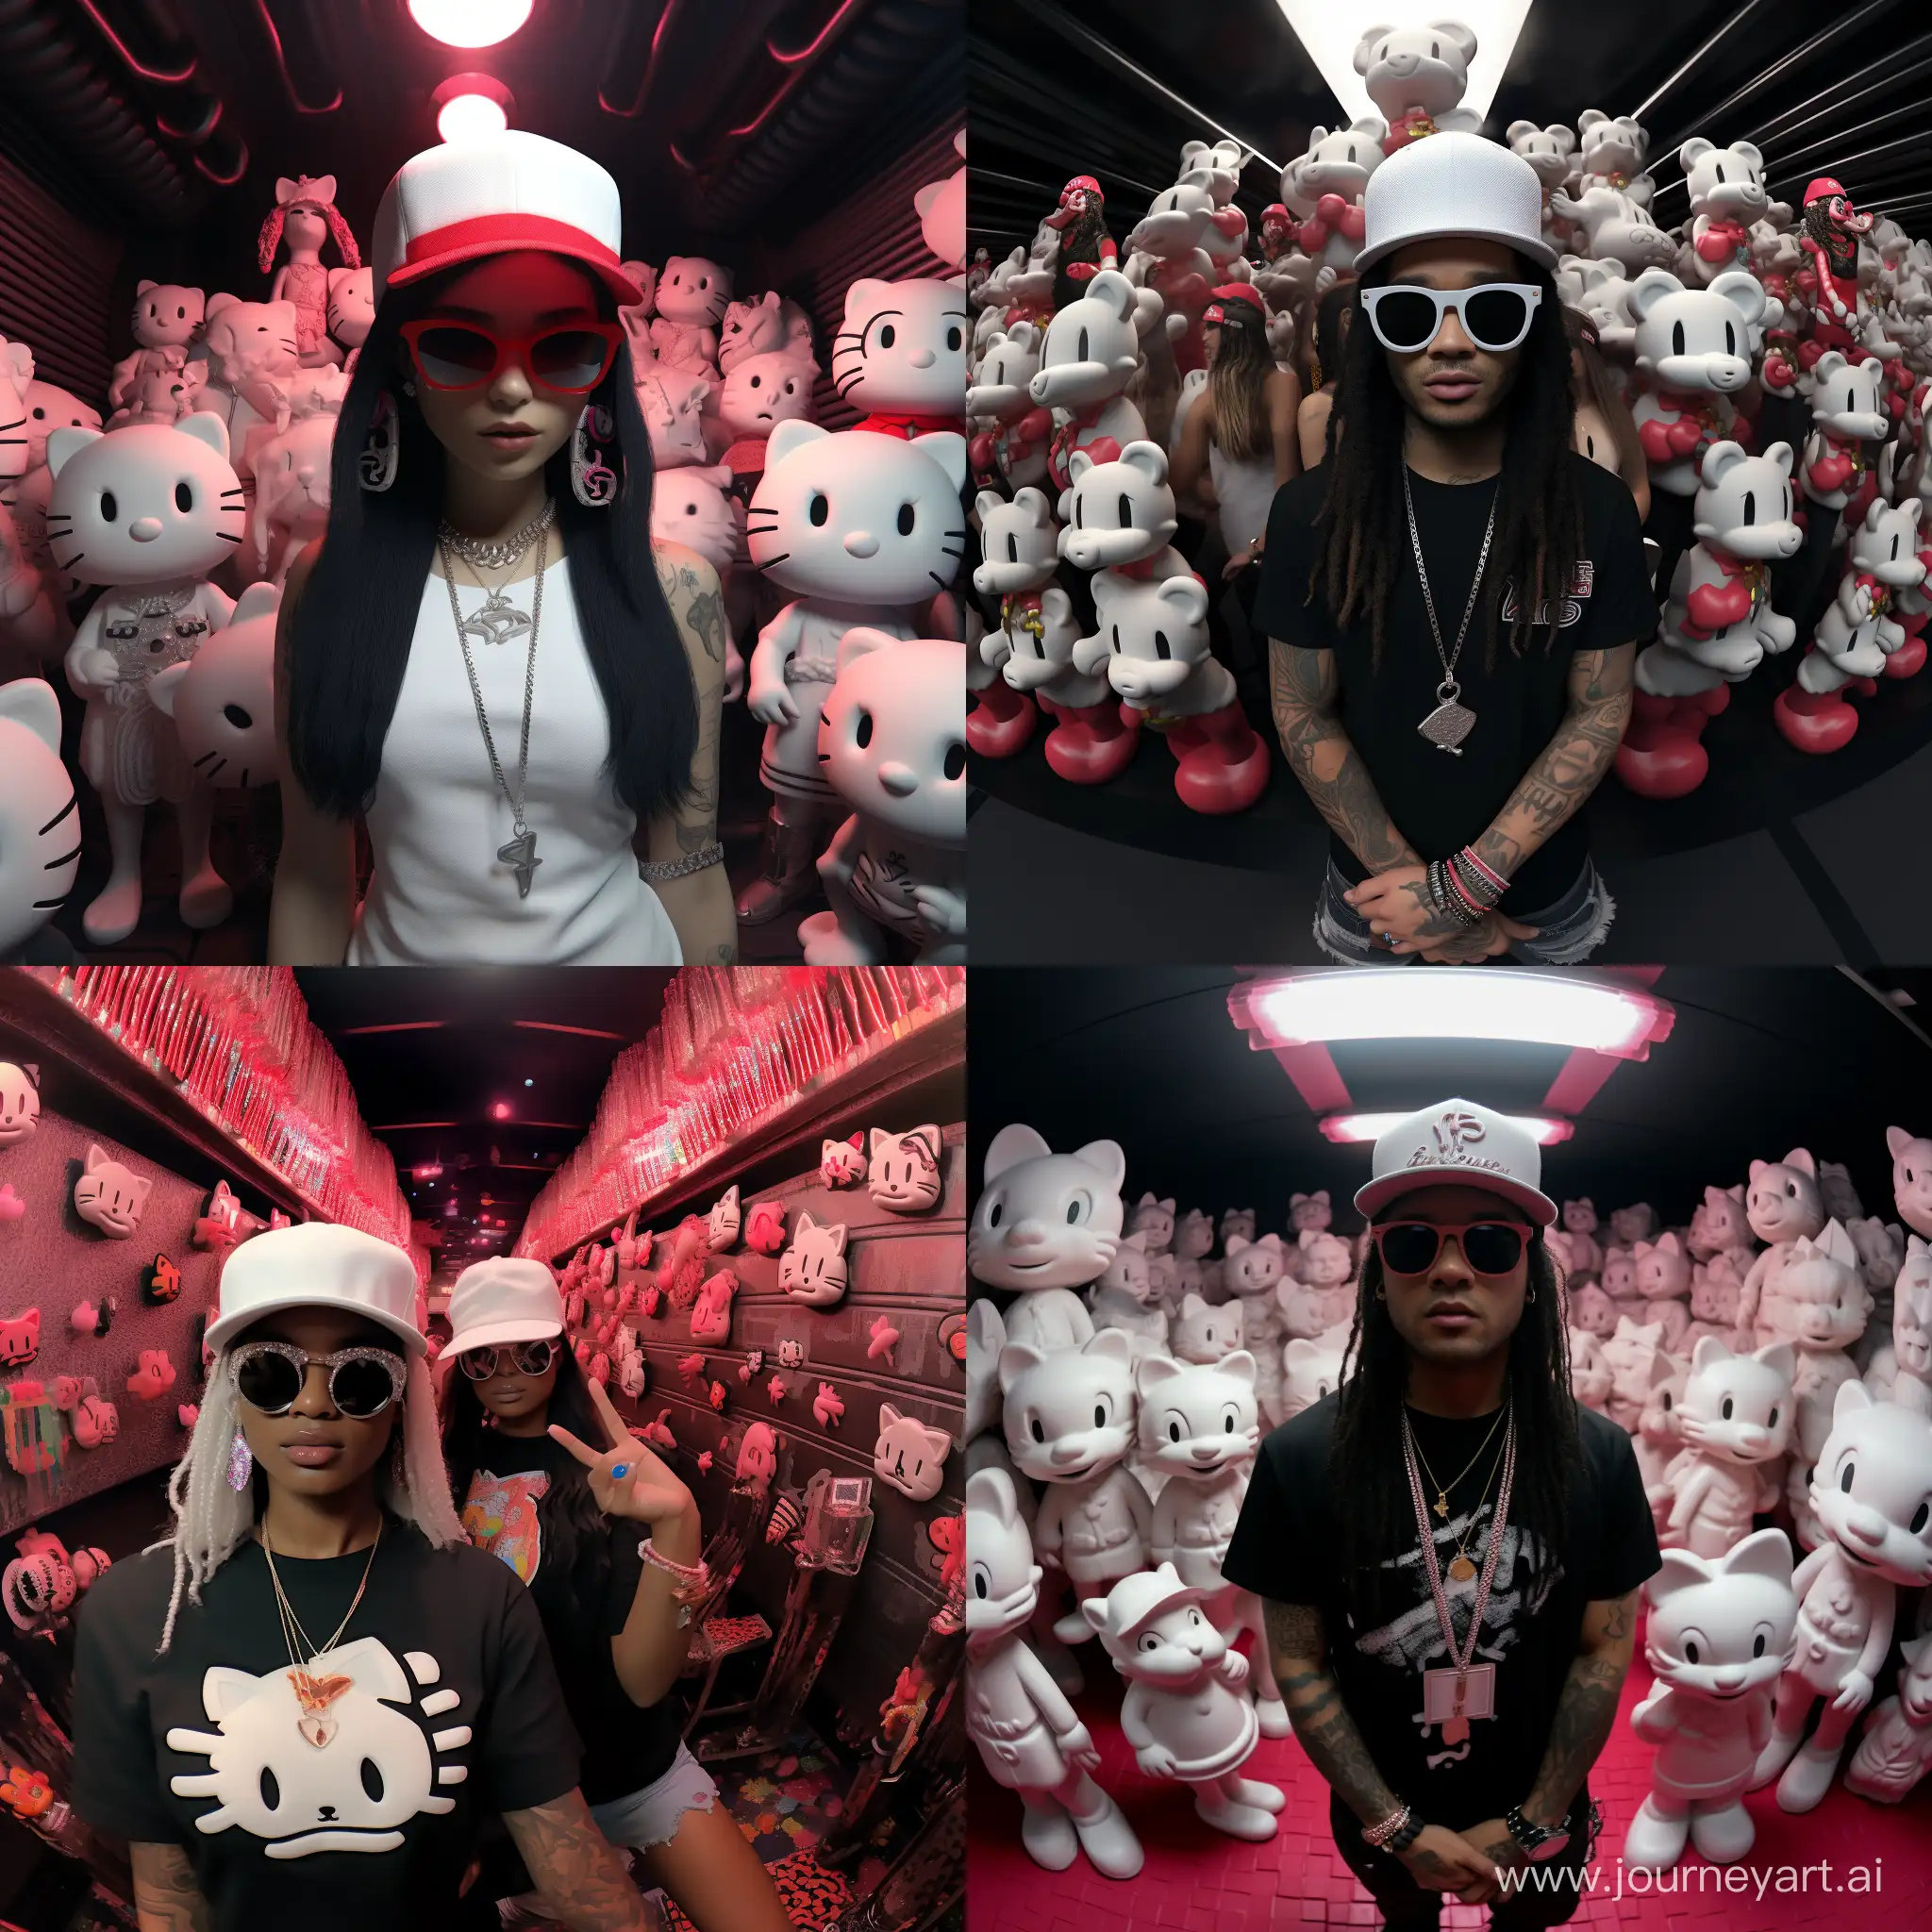 Stylish-Rappers-in-White-Hats-and-Sunglasses-at-3D-Club-Entrance-with-Hello-Kitty